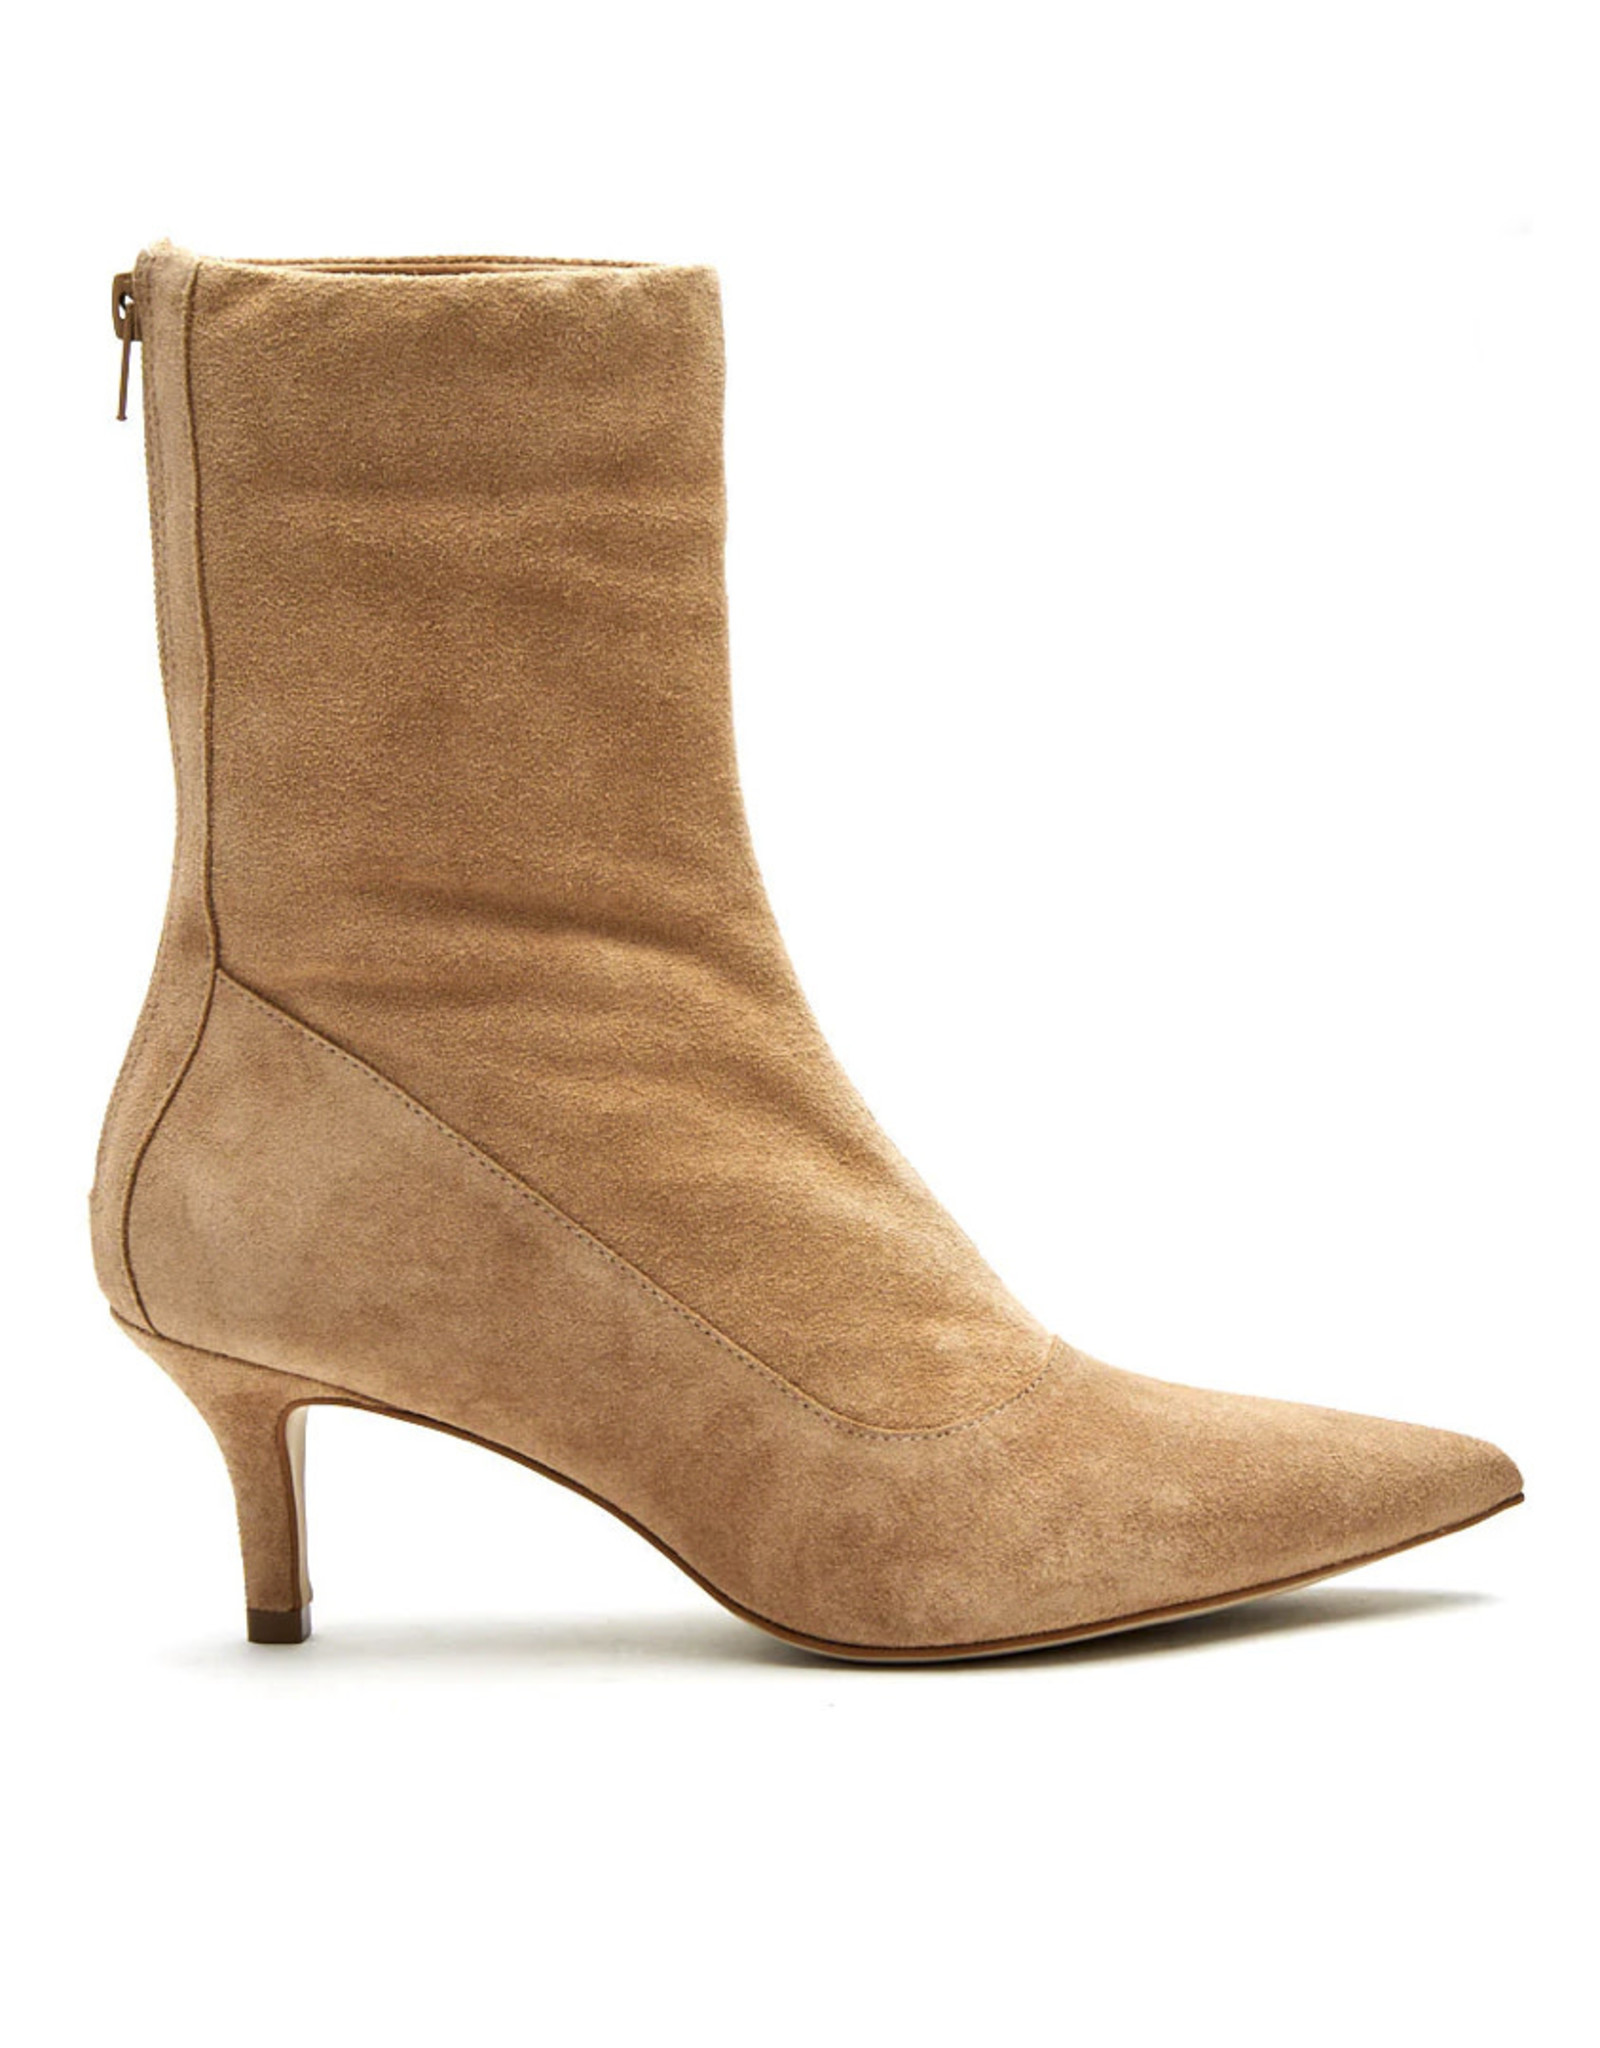 Matisse CiCi Natural Suede Boots